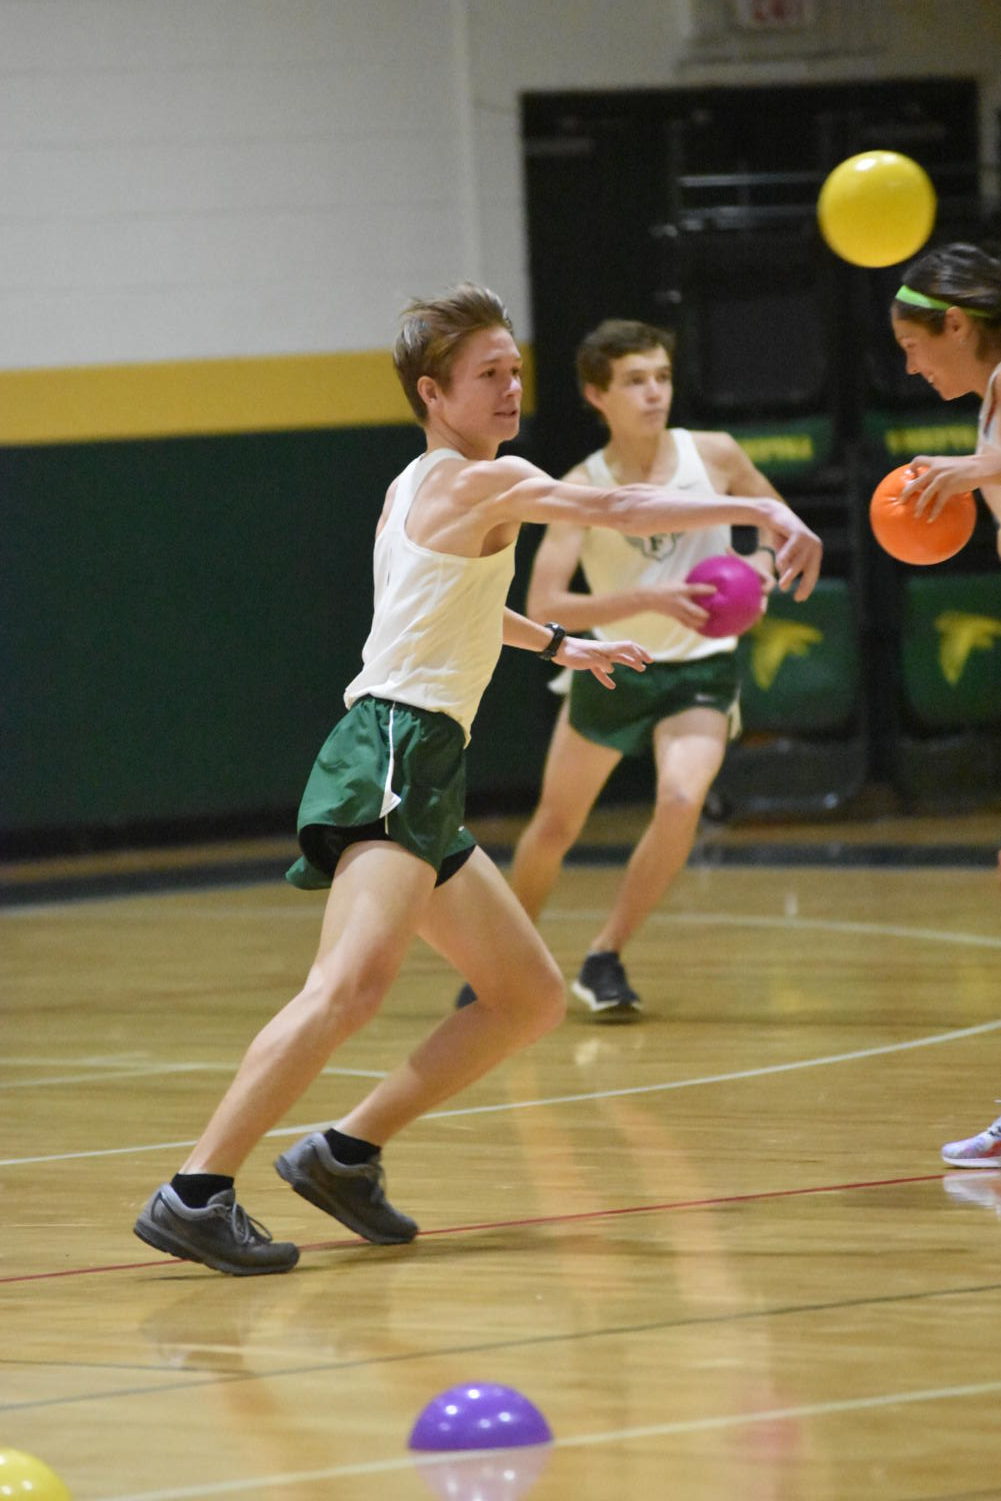 Gallery+of+the+Day%3A+StuCo+Dodgeball+Tournament+close-ups